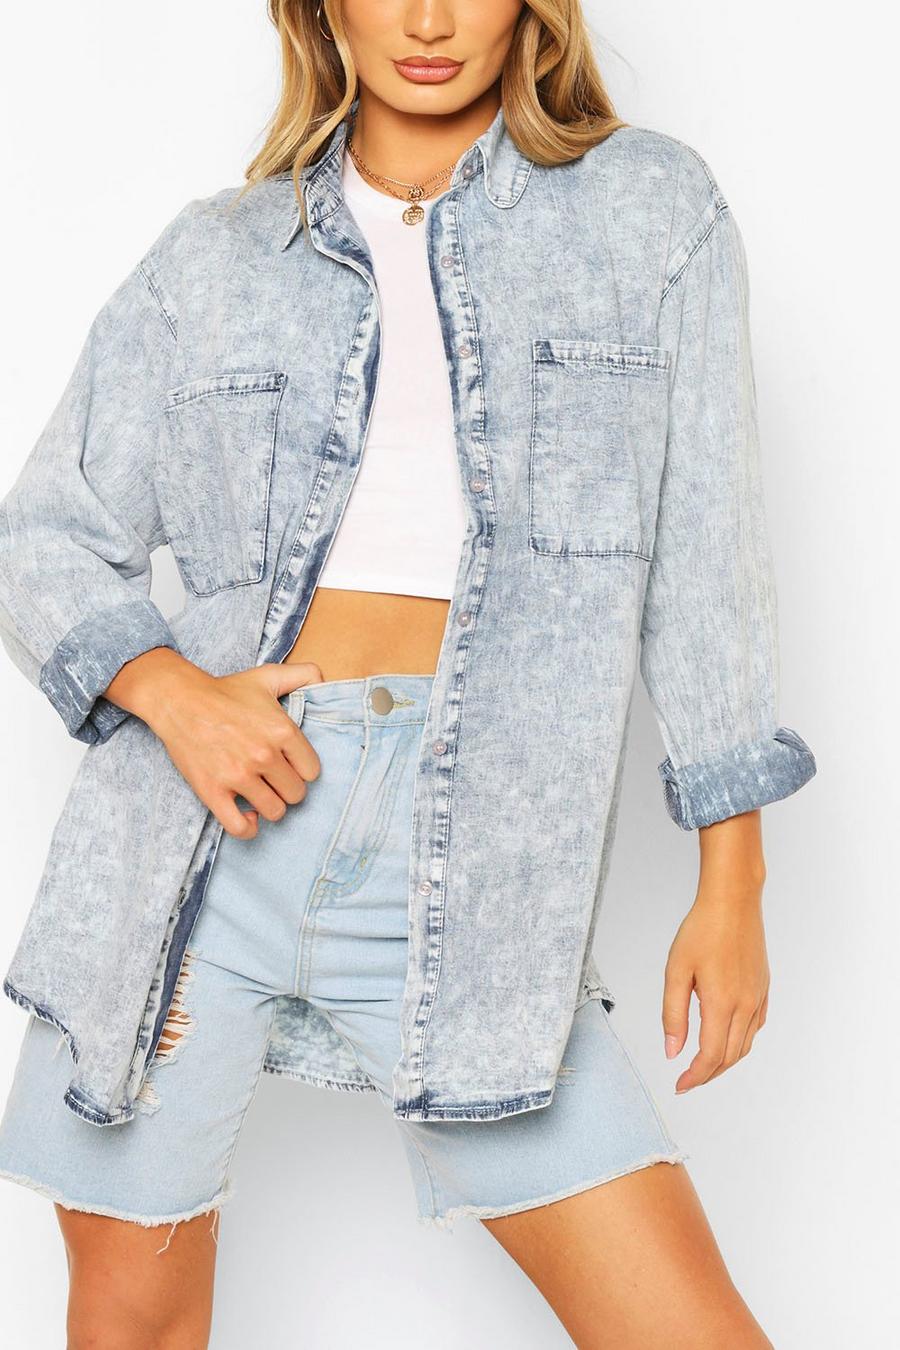 Oversized Light Wash Chambray Spijkerblouse image number 1